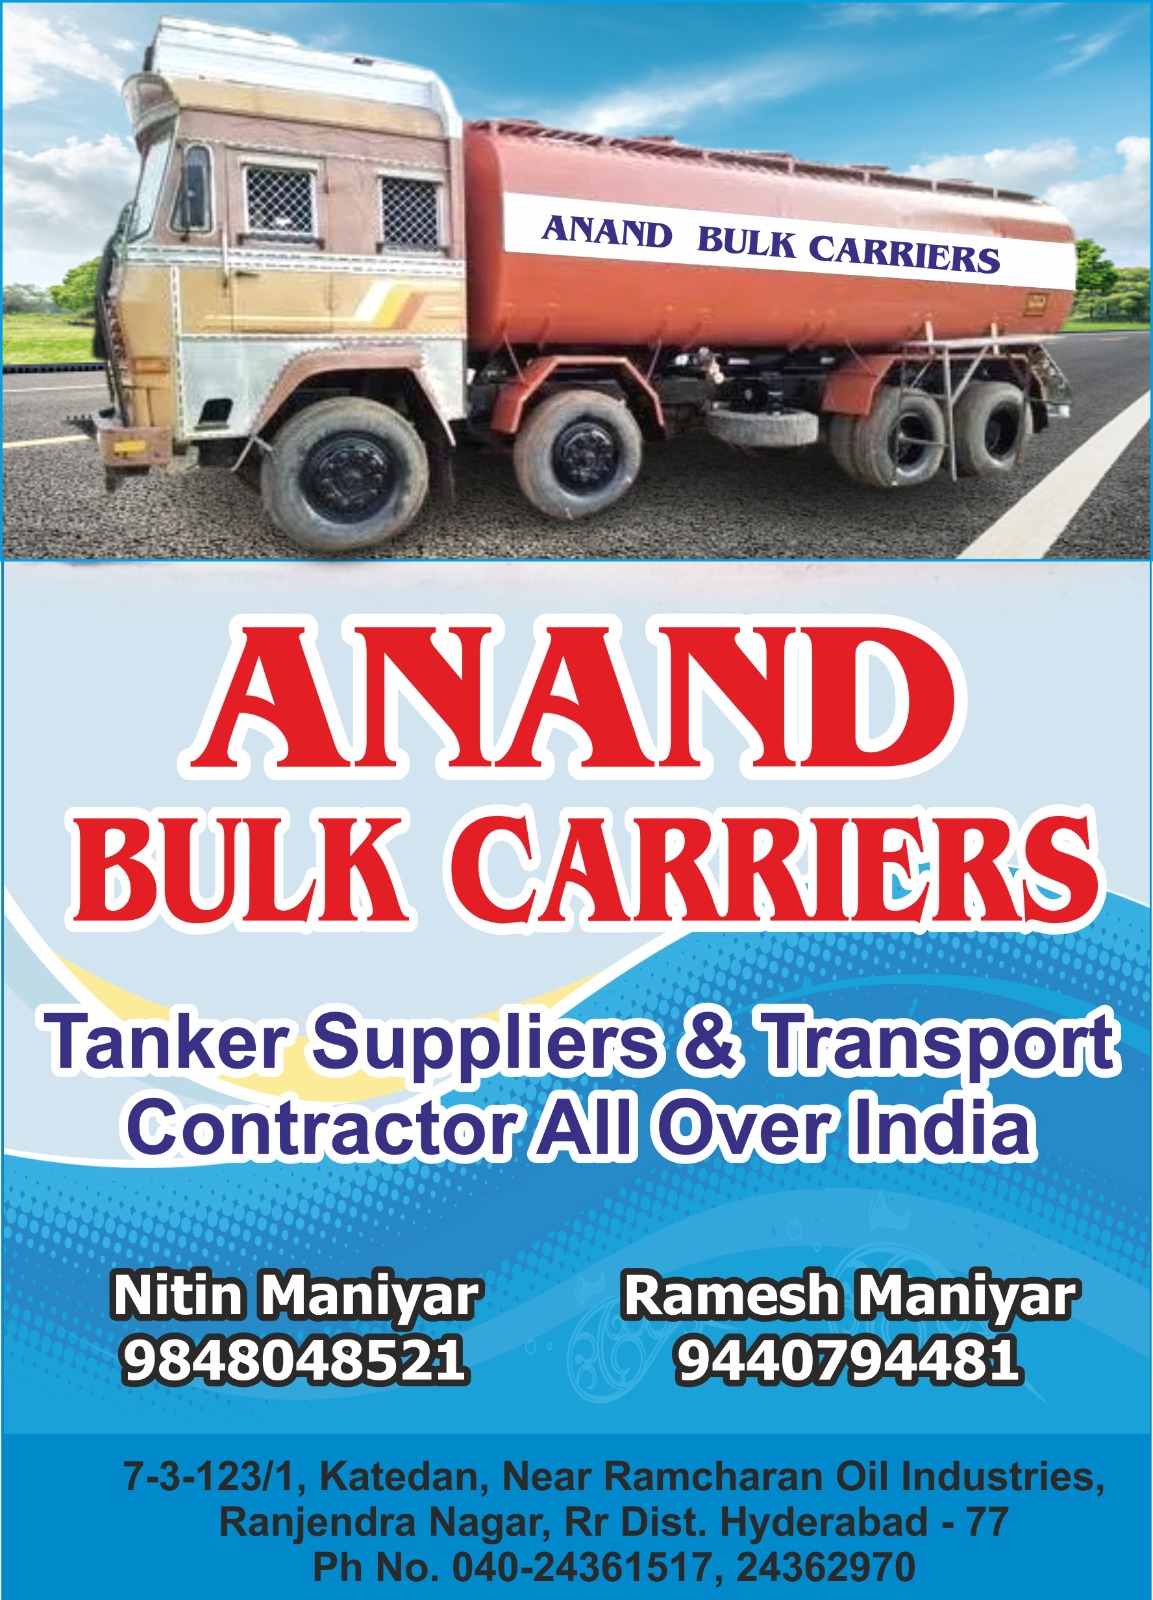 Anand Bulk Carriers